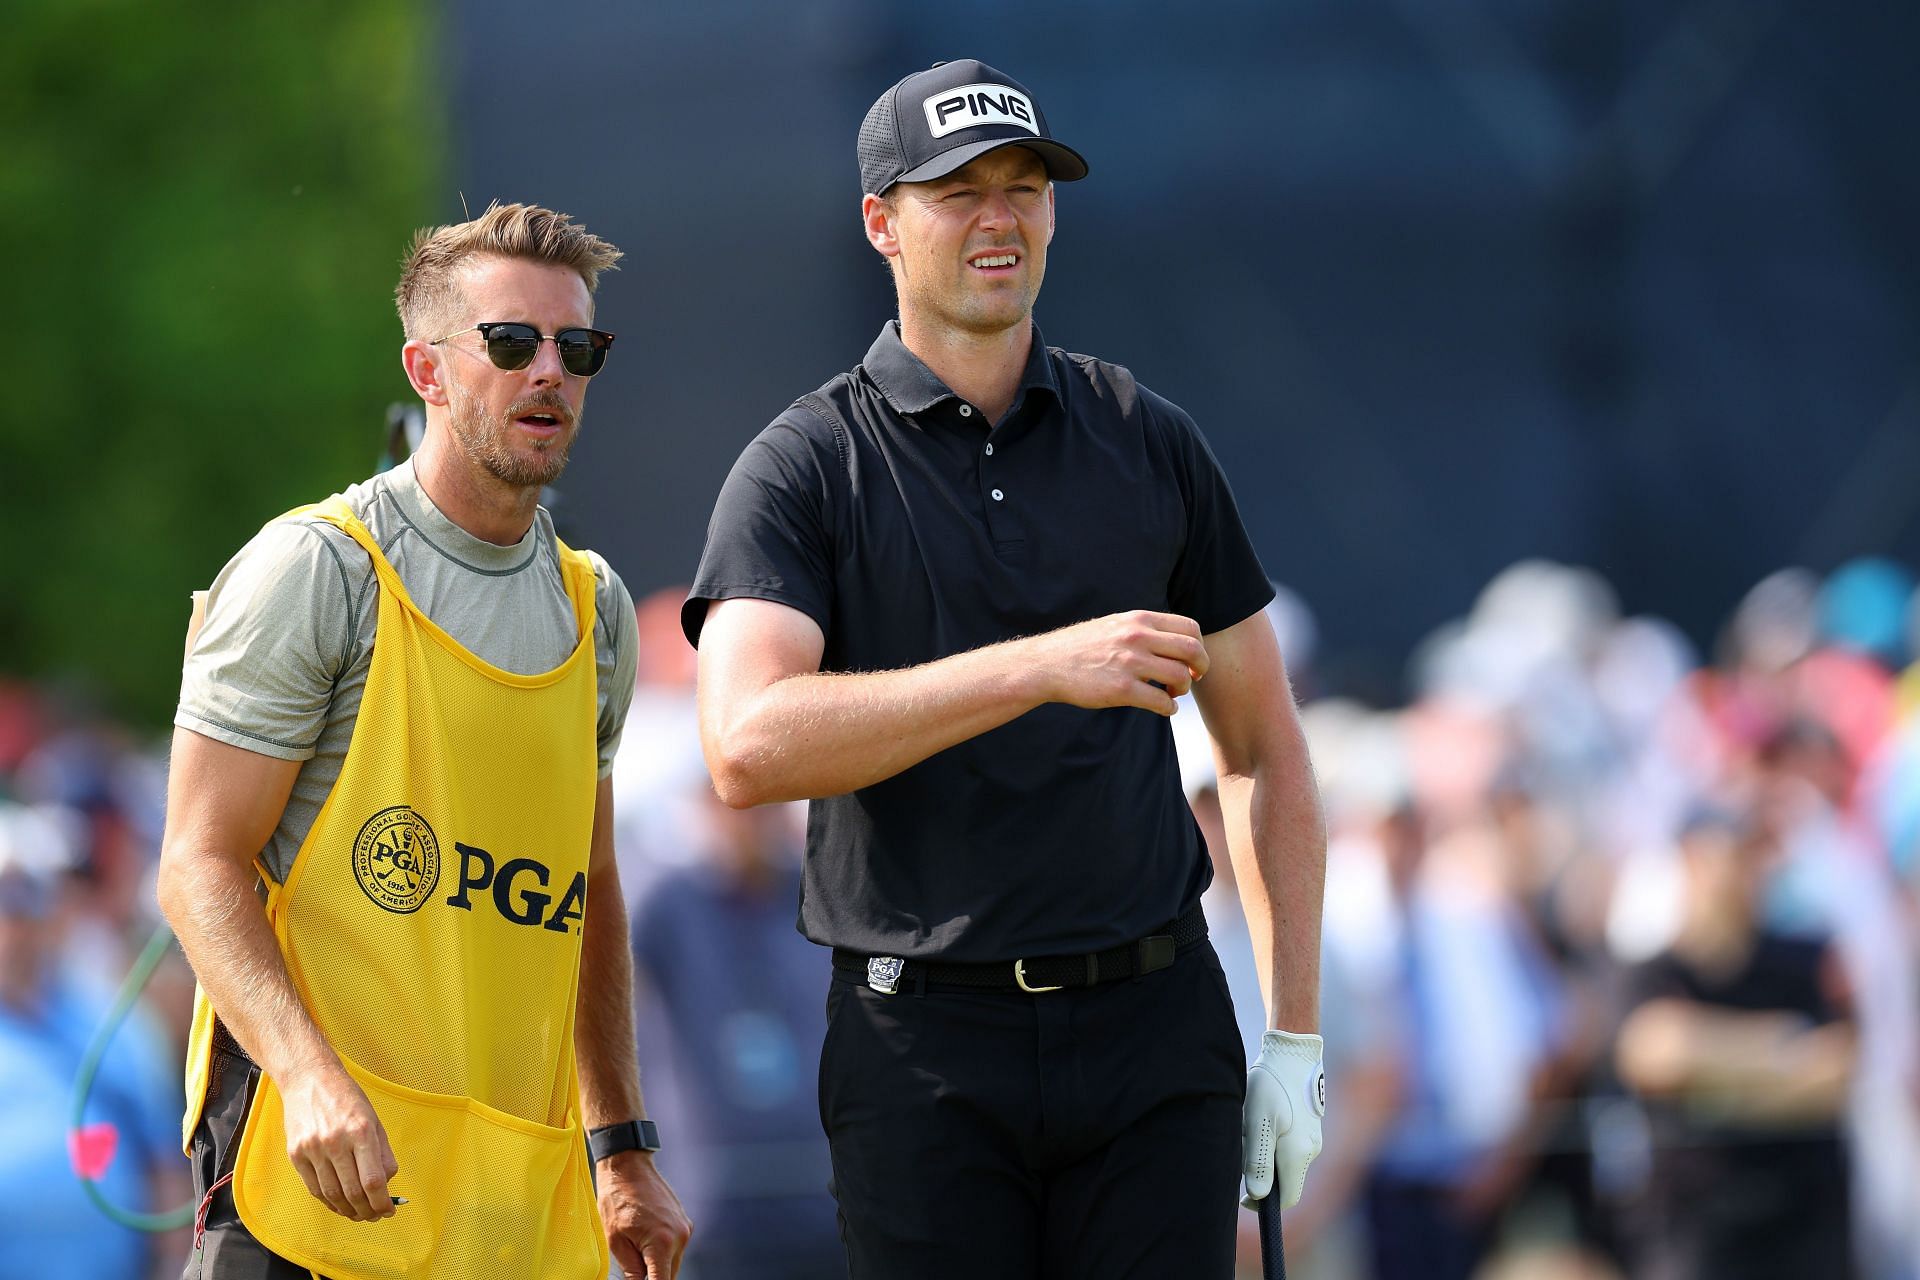 Victor Perez and his caddie, James Erkenbeck, at the 2023 PGA Championship - Final Round (Image via Getty).